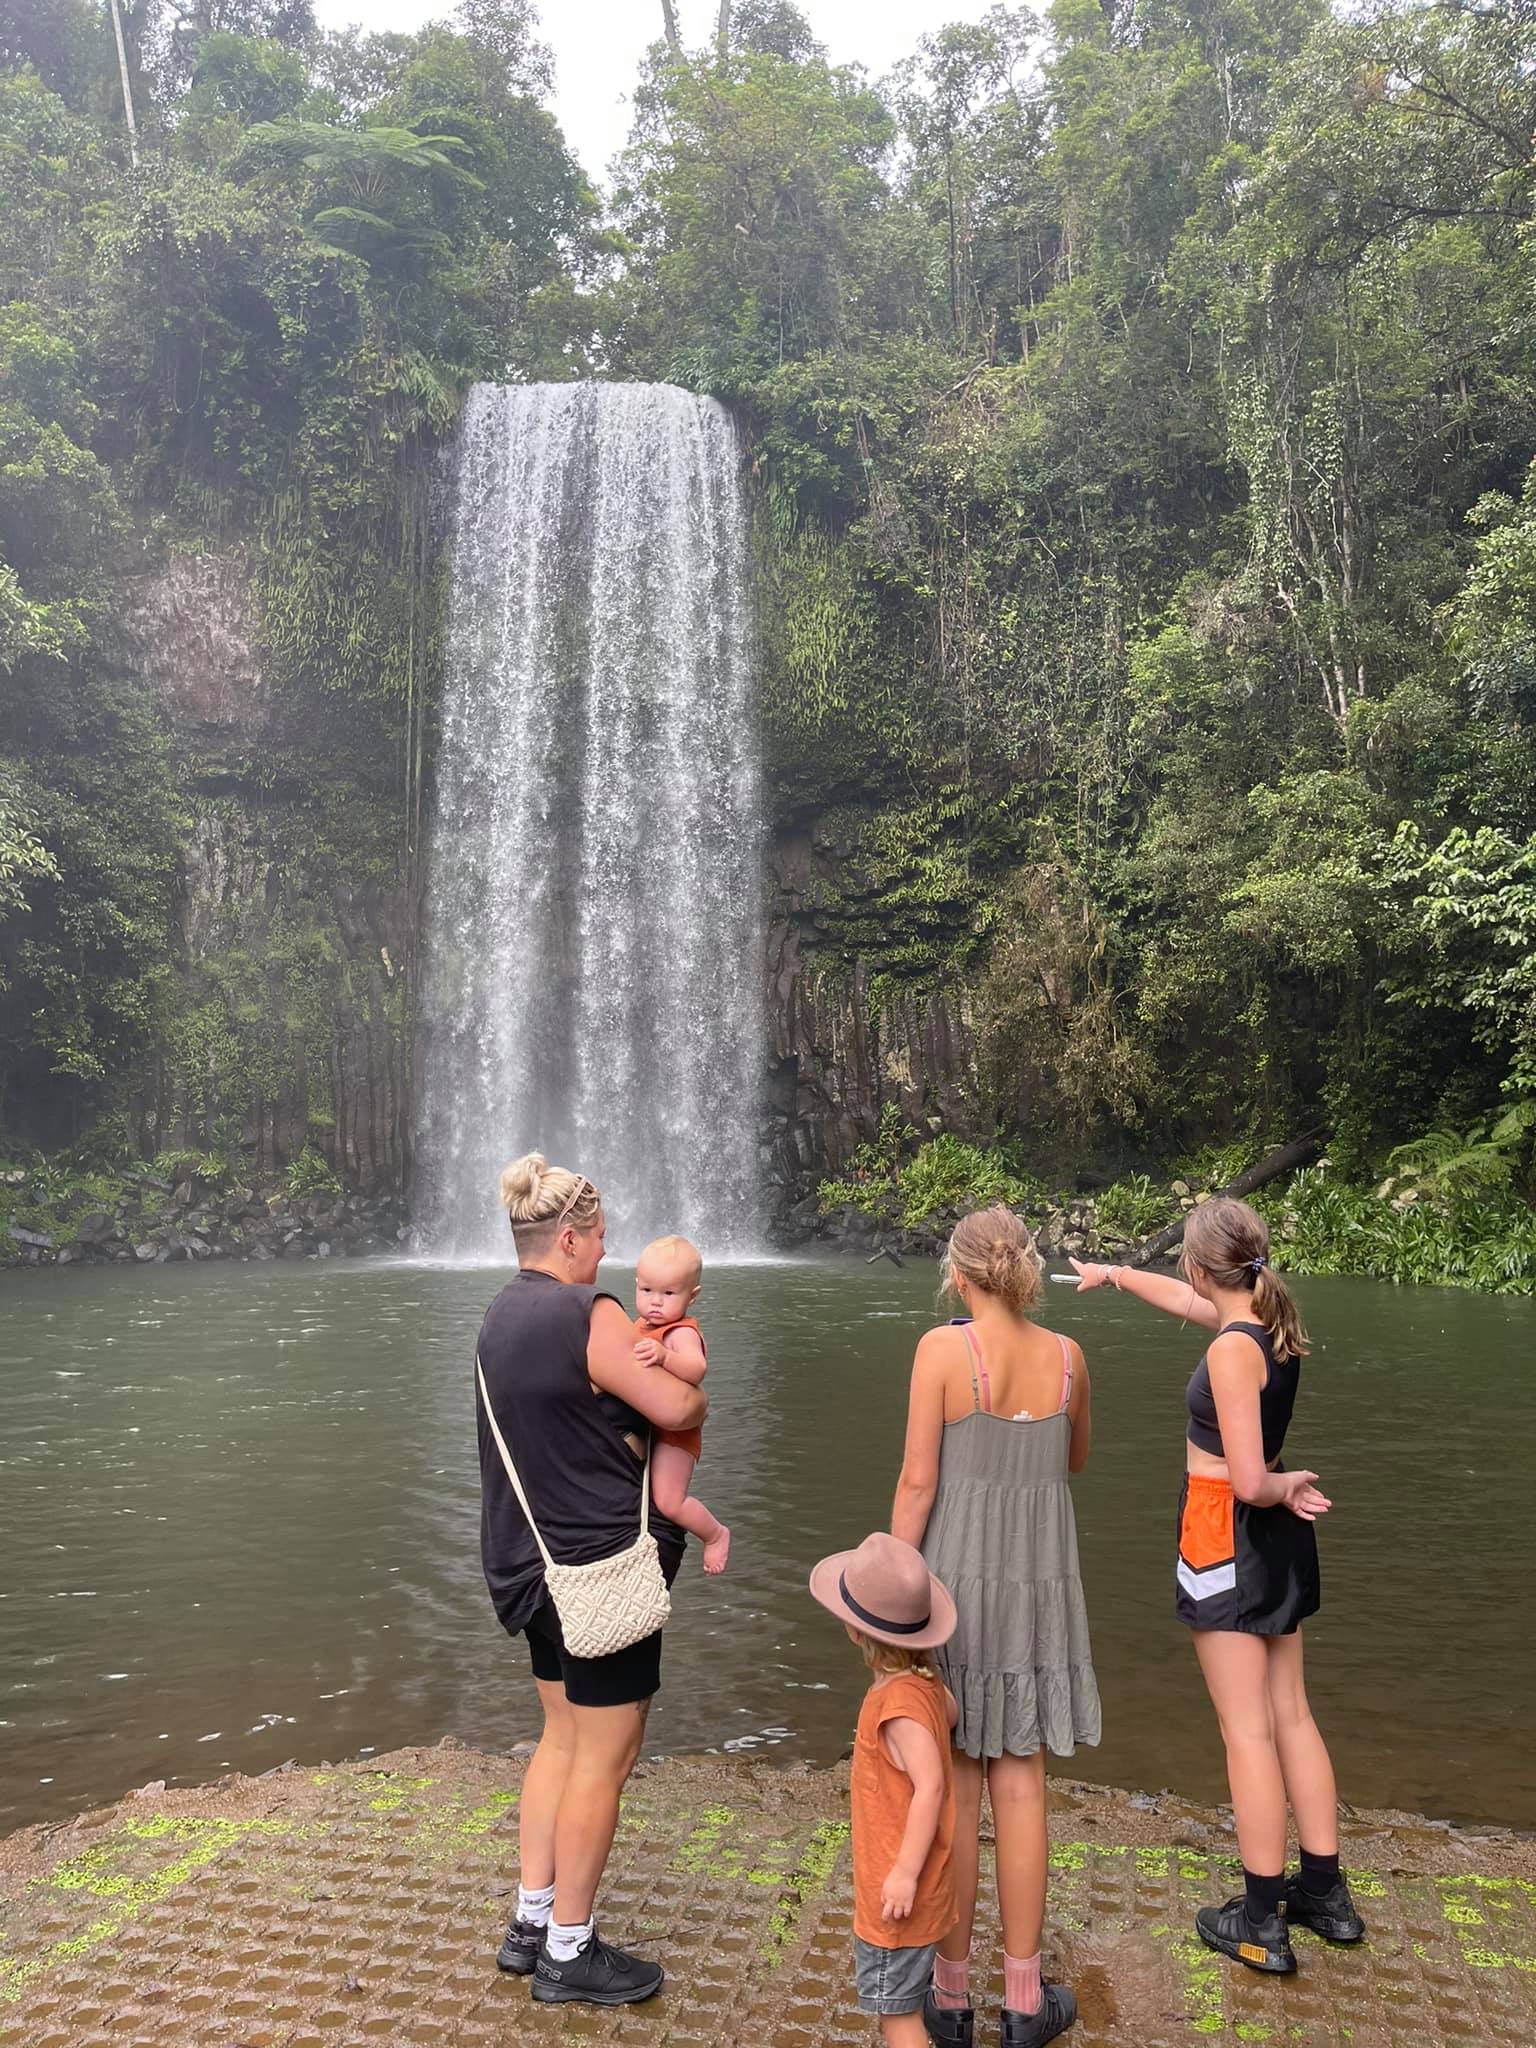 A family pose together for a photo at a waterfall.